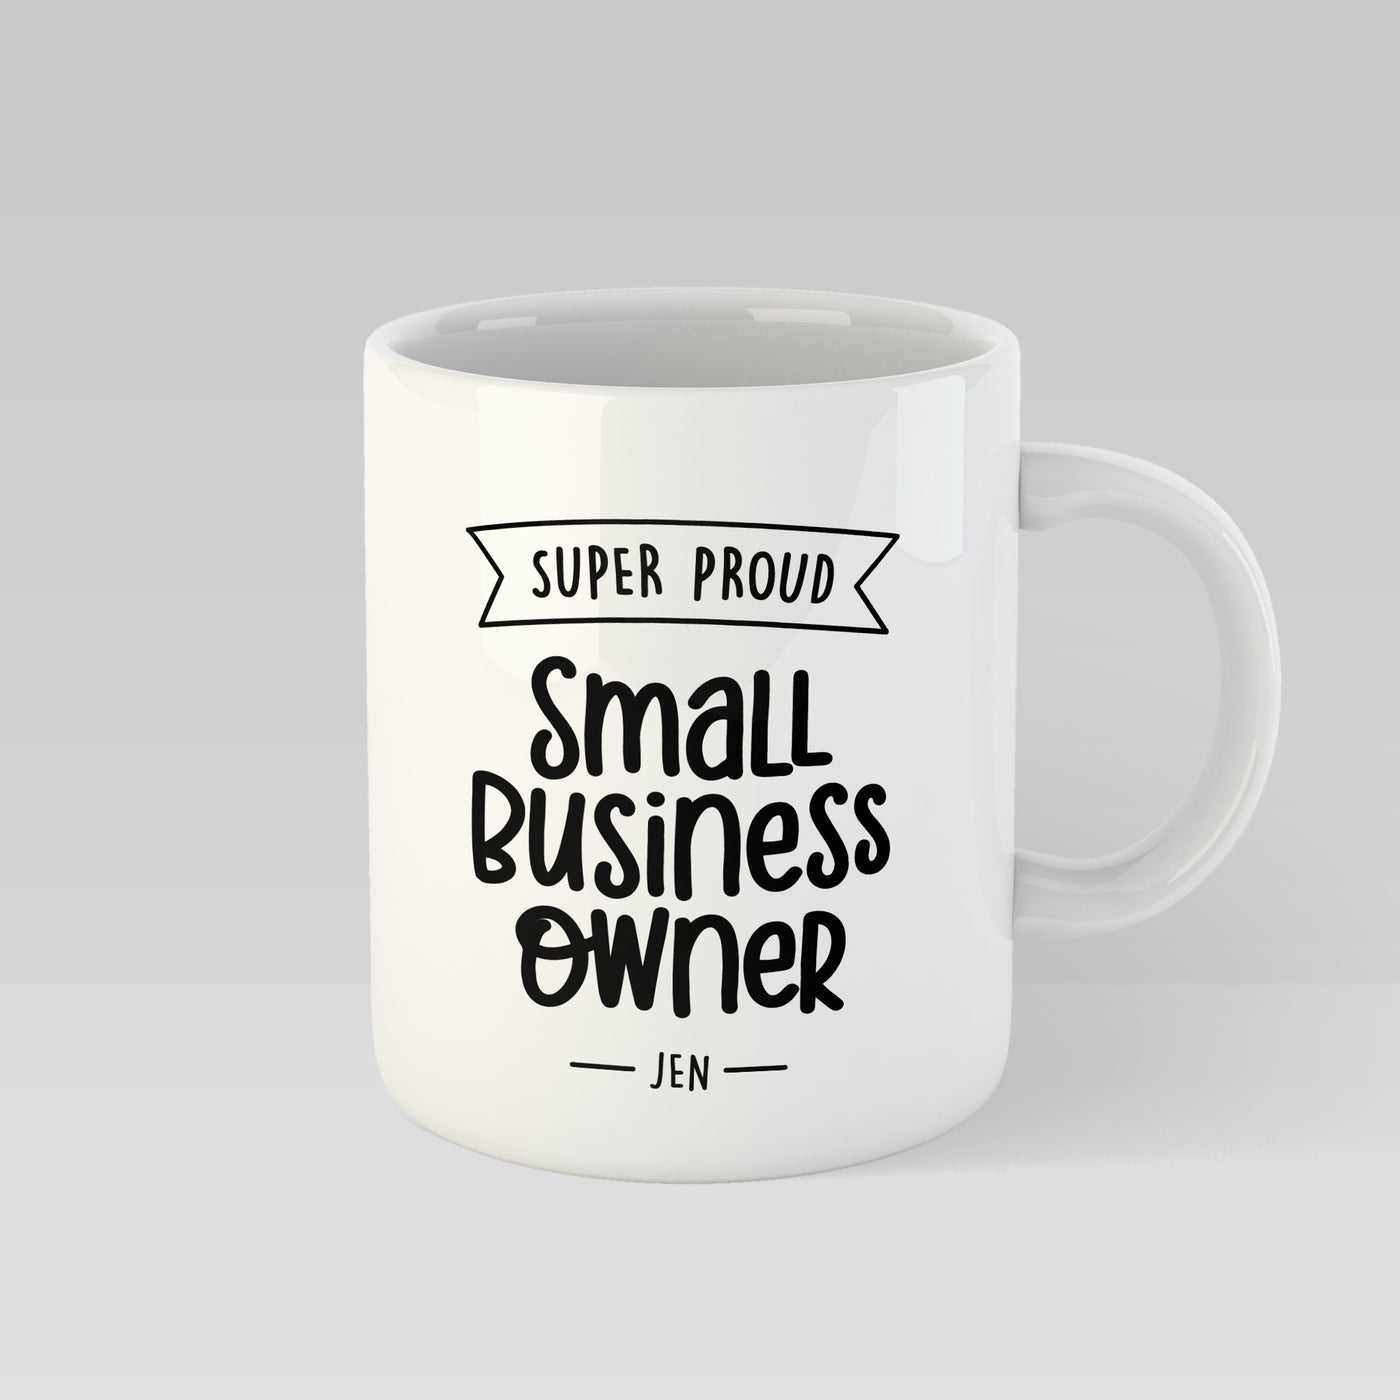 Super Proud Small Business Owner Personalised Mug